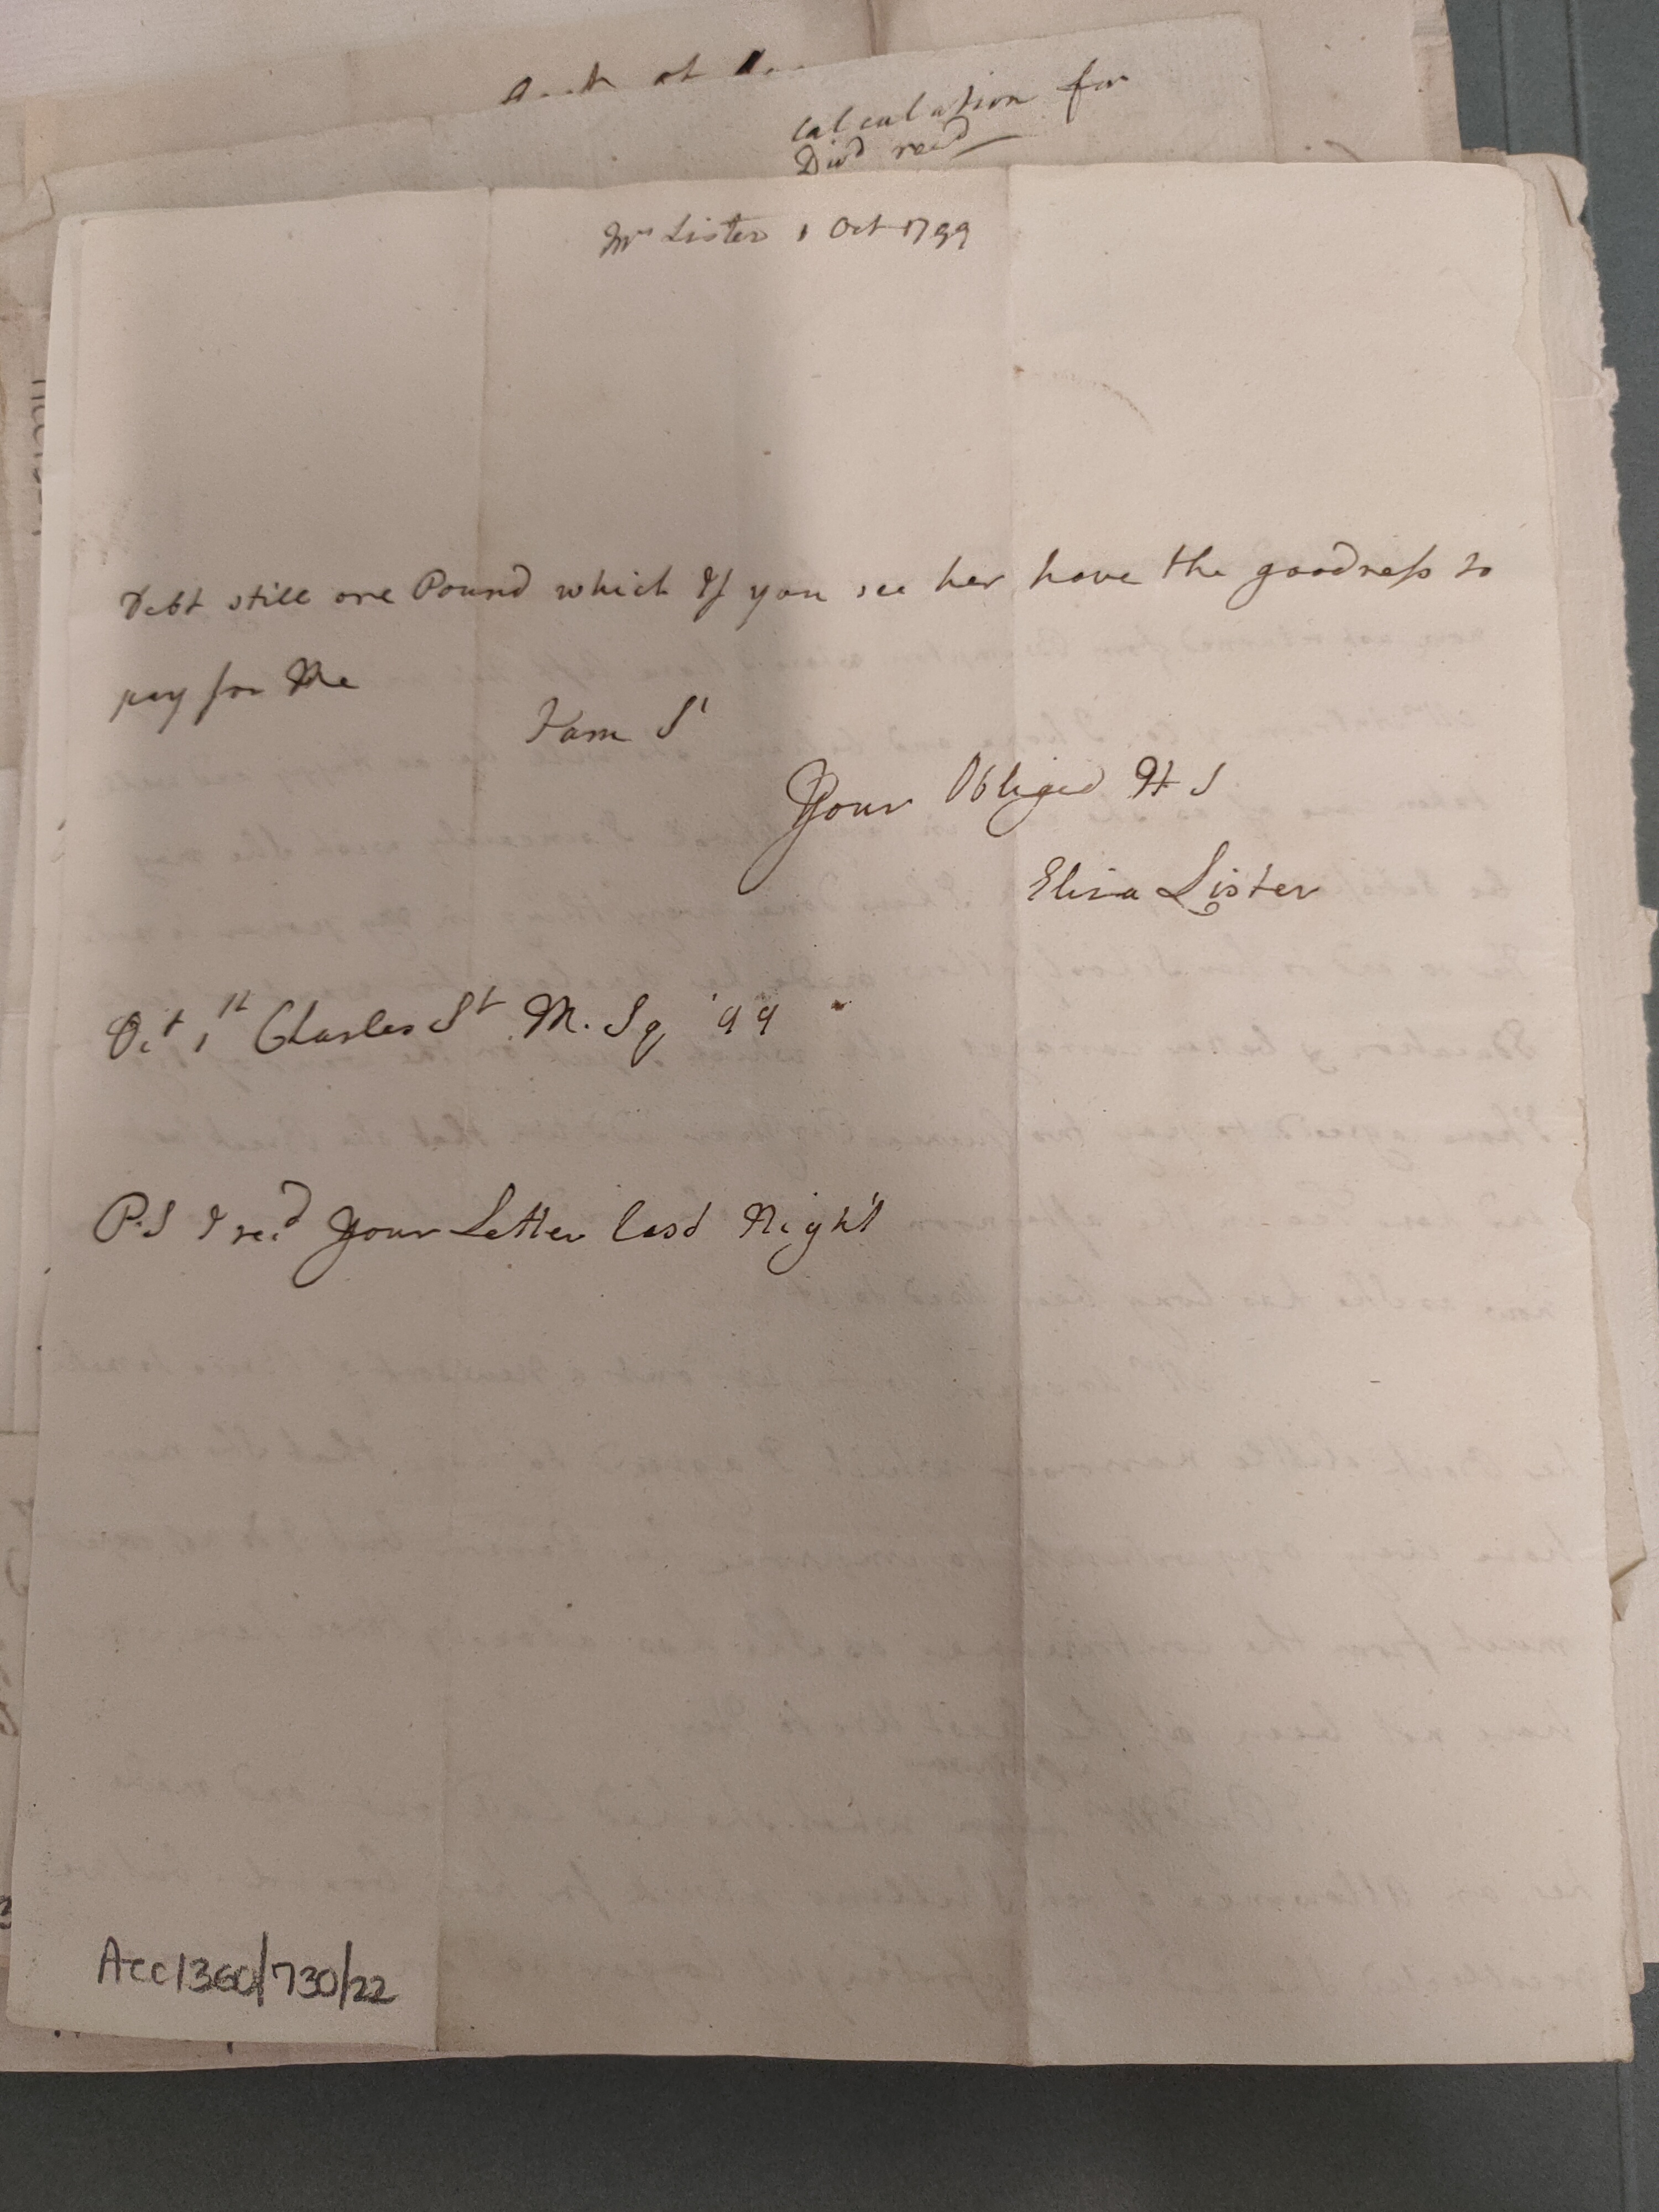 Image #2 of letter: Elizabeth Lister to [?Executors of Dr John Taylour’s will], 1 October 1799